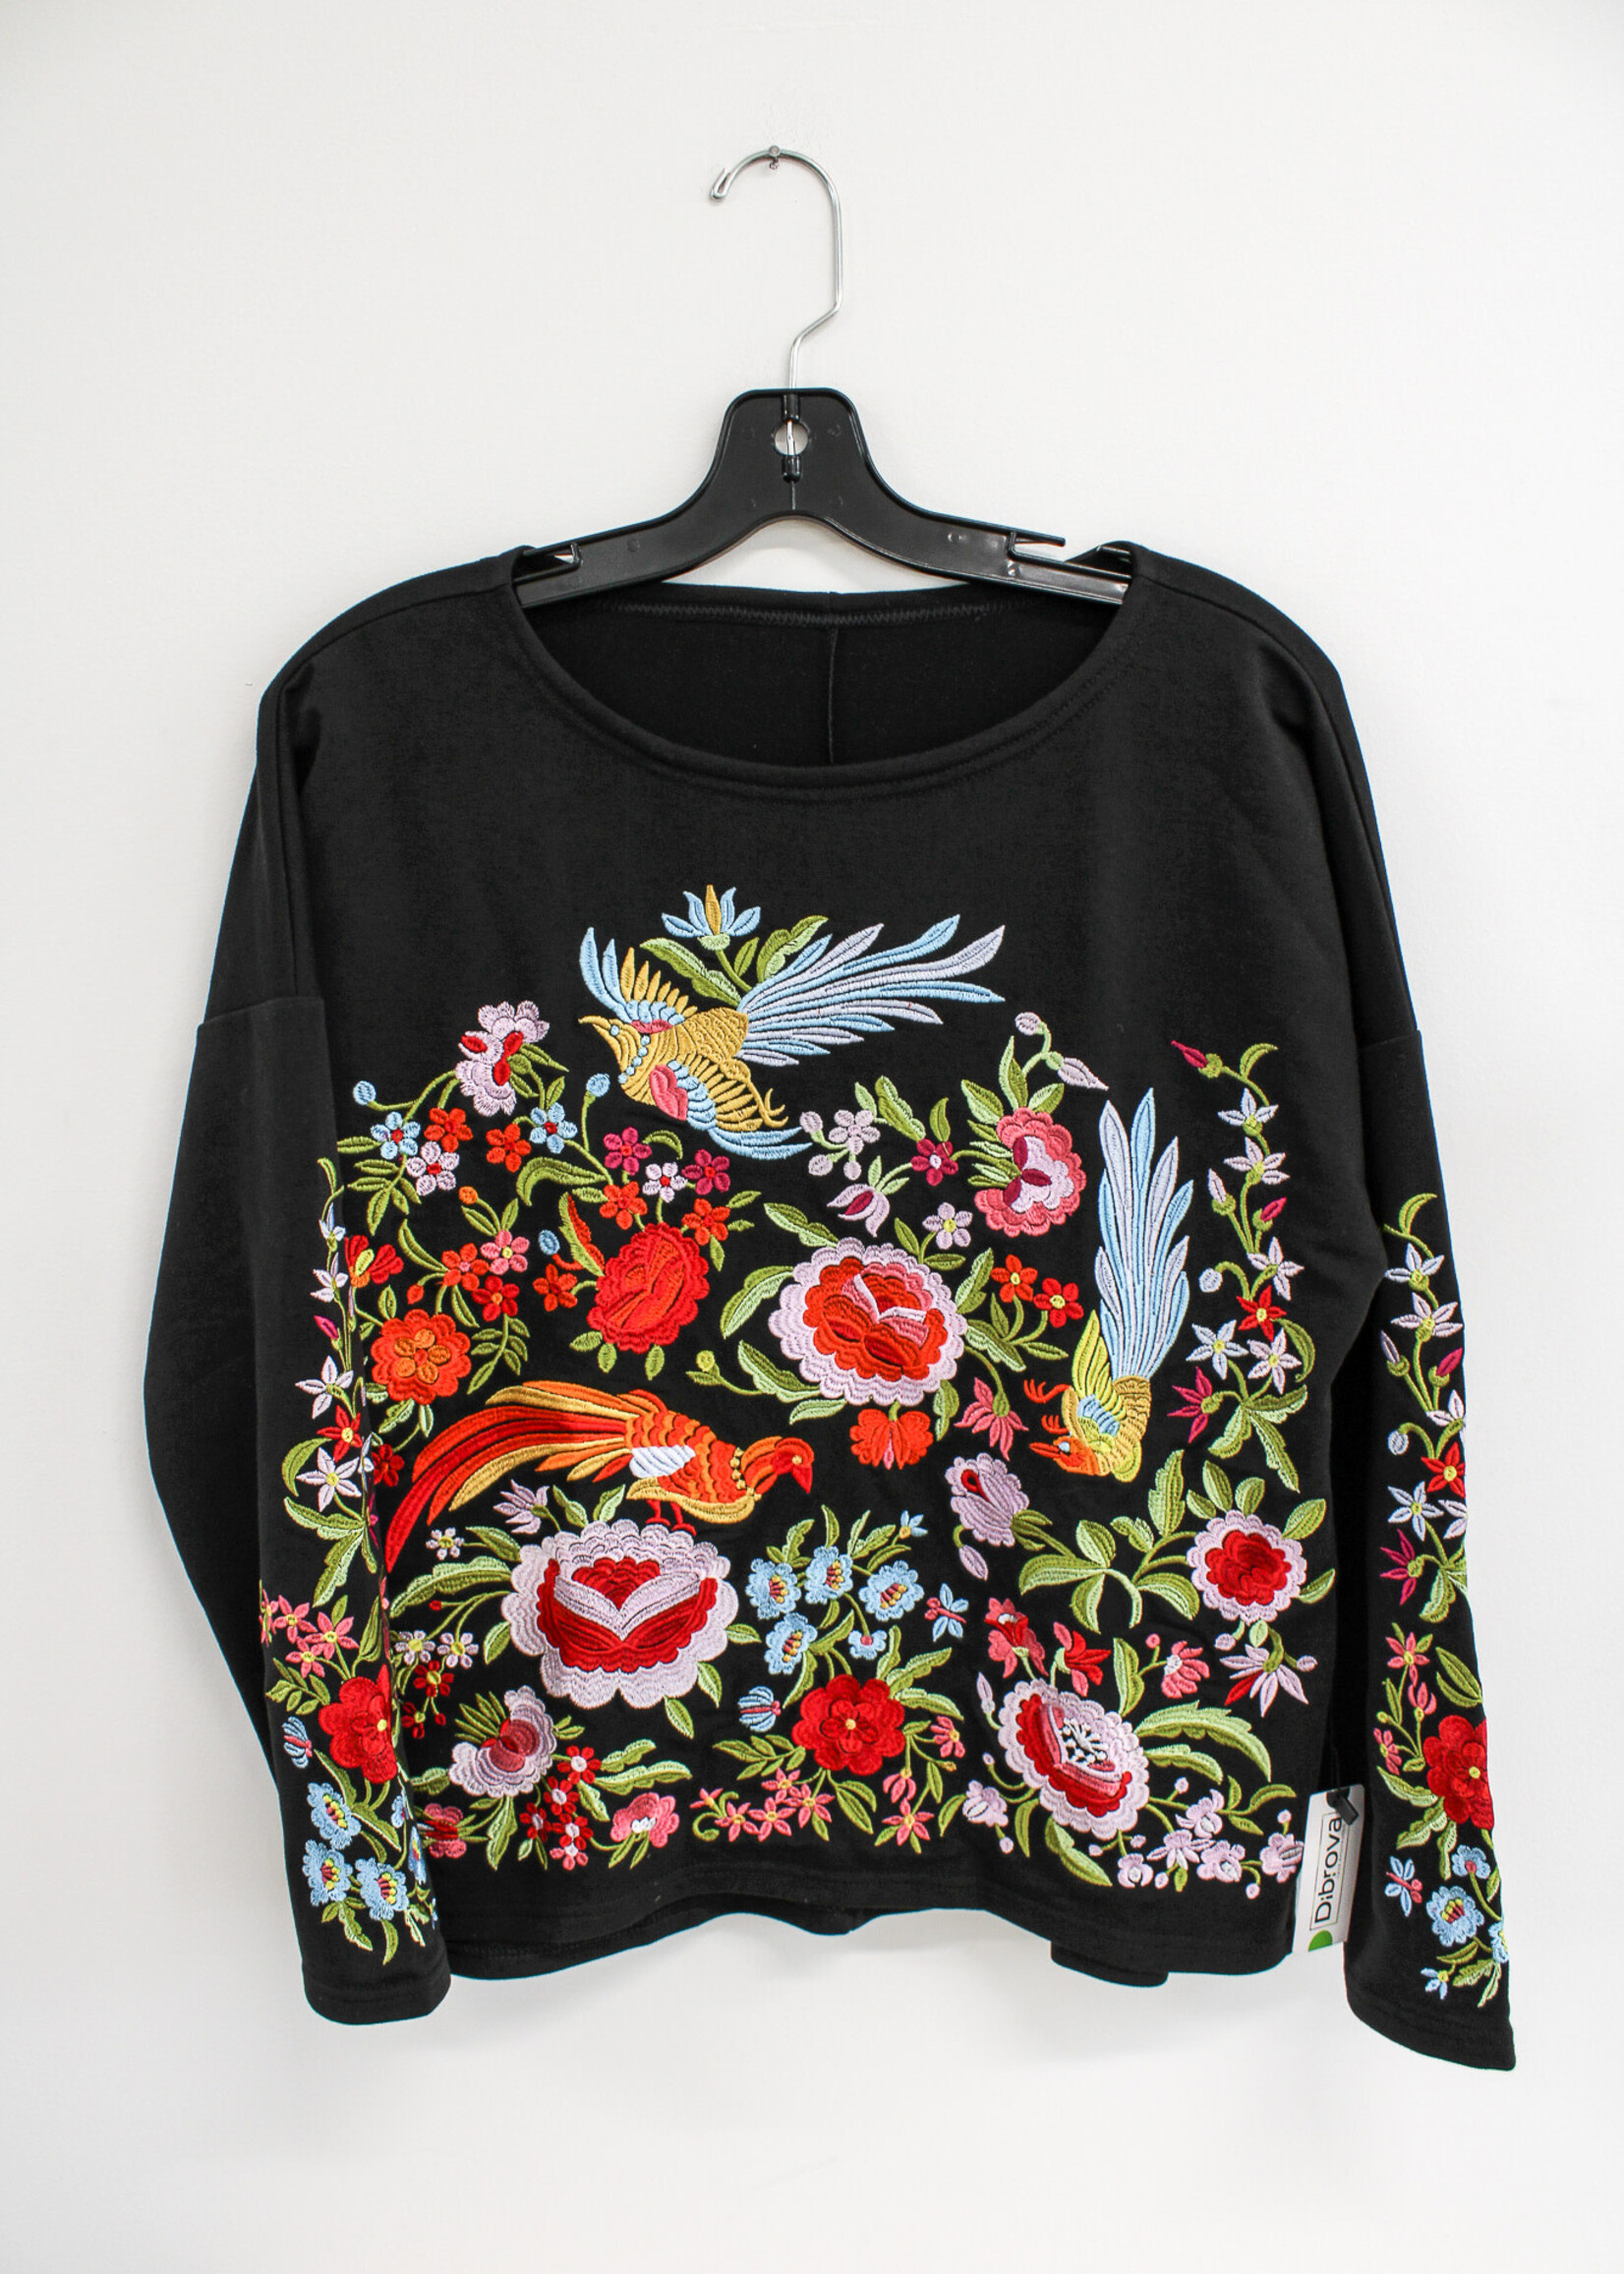 SWEATSHIRT - (W) Long Sleeve with colorful embroidery